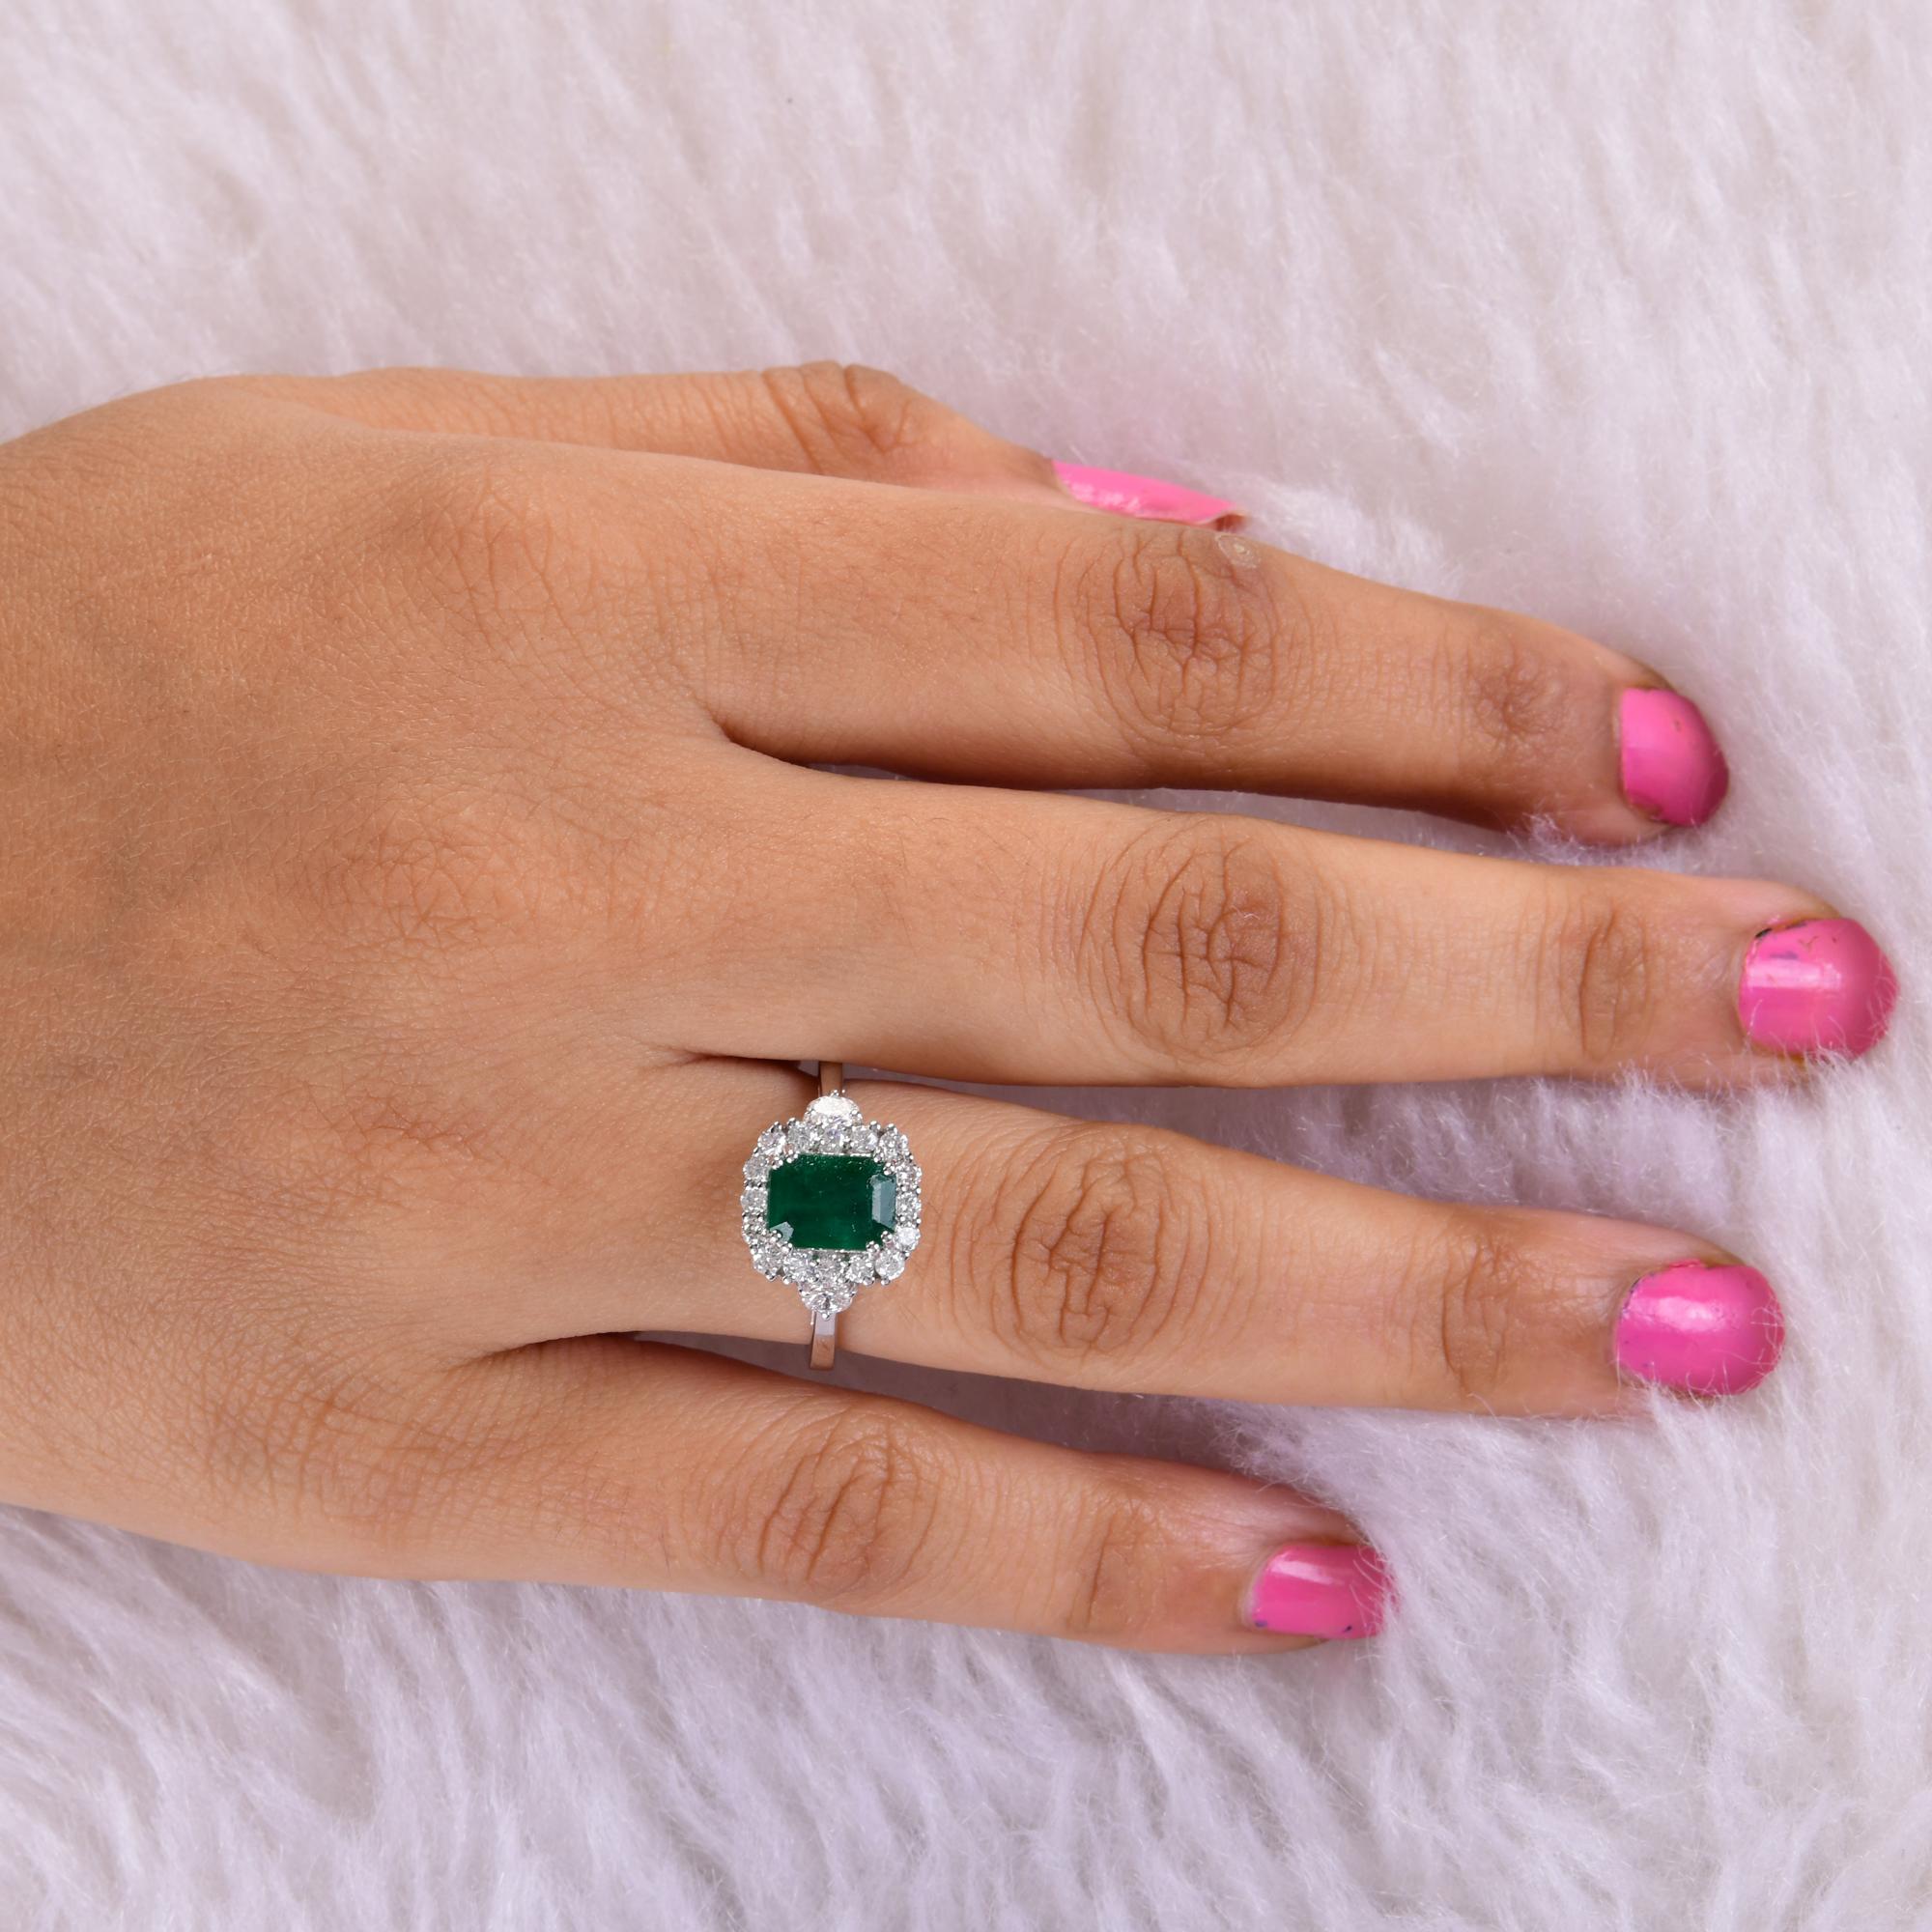 Immerse yourself in the luxurious splendor of this Real Zambian Emerald Gemstone Cocktail Ring, embellished with dazzling diamonds and meticulously crafted in opulent 18 karat white gold. This exquisite ring is a testament to refined elegance and